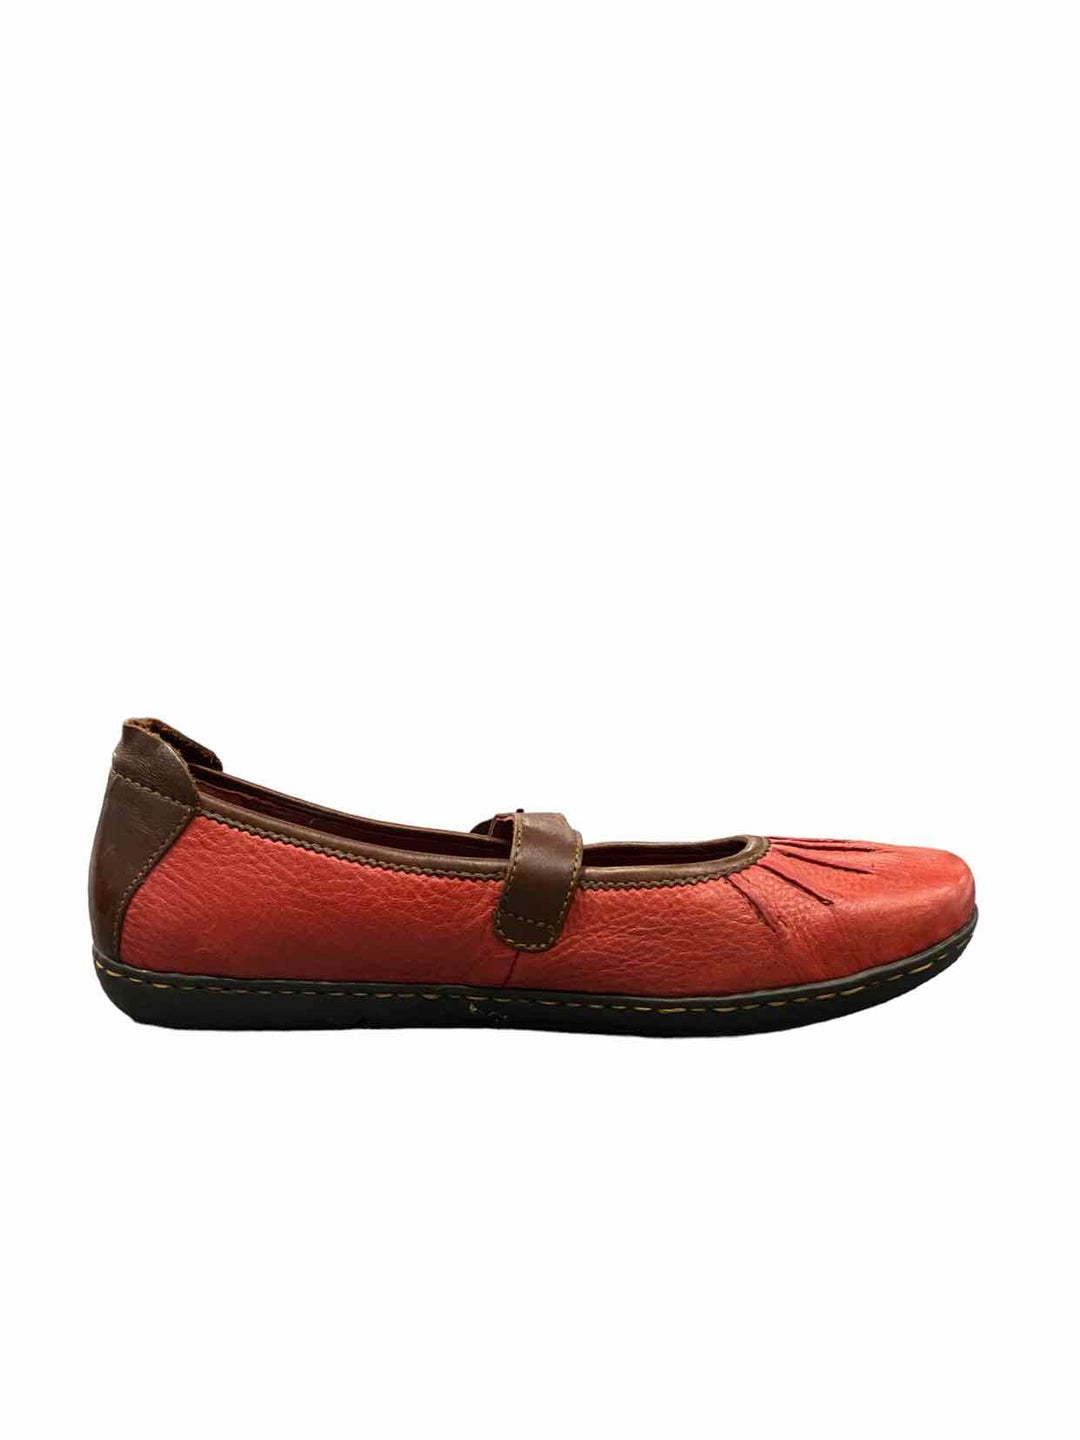 Born Shoe Size 8.5 Red Flats